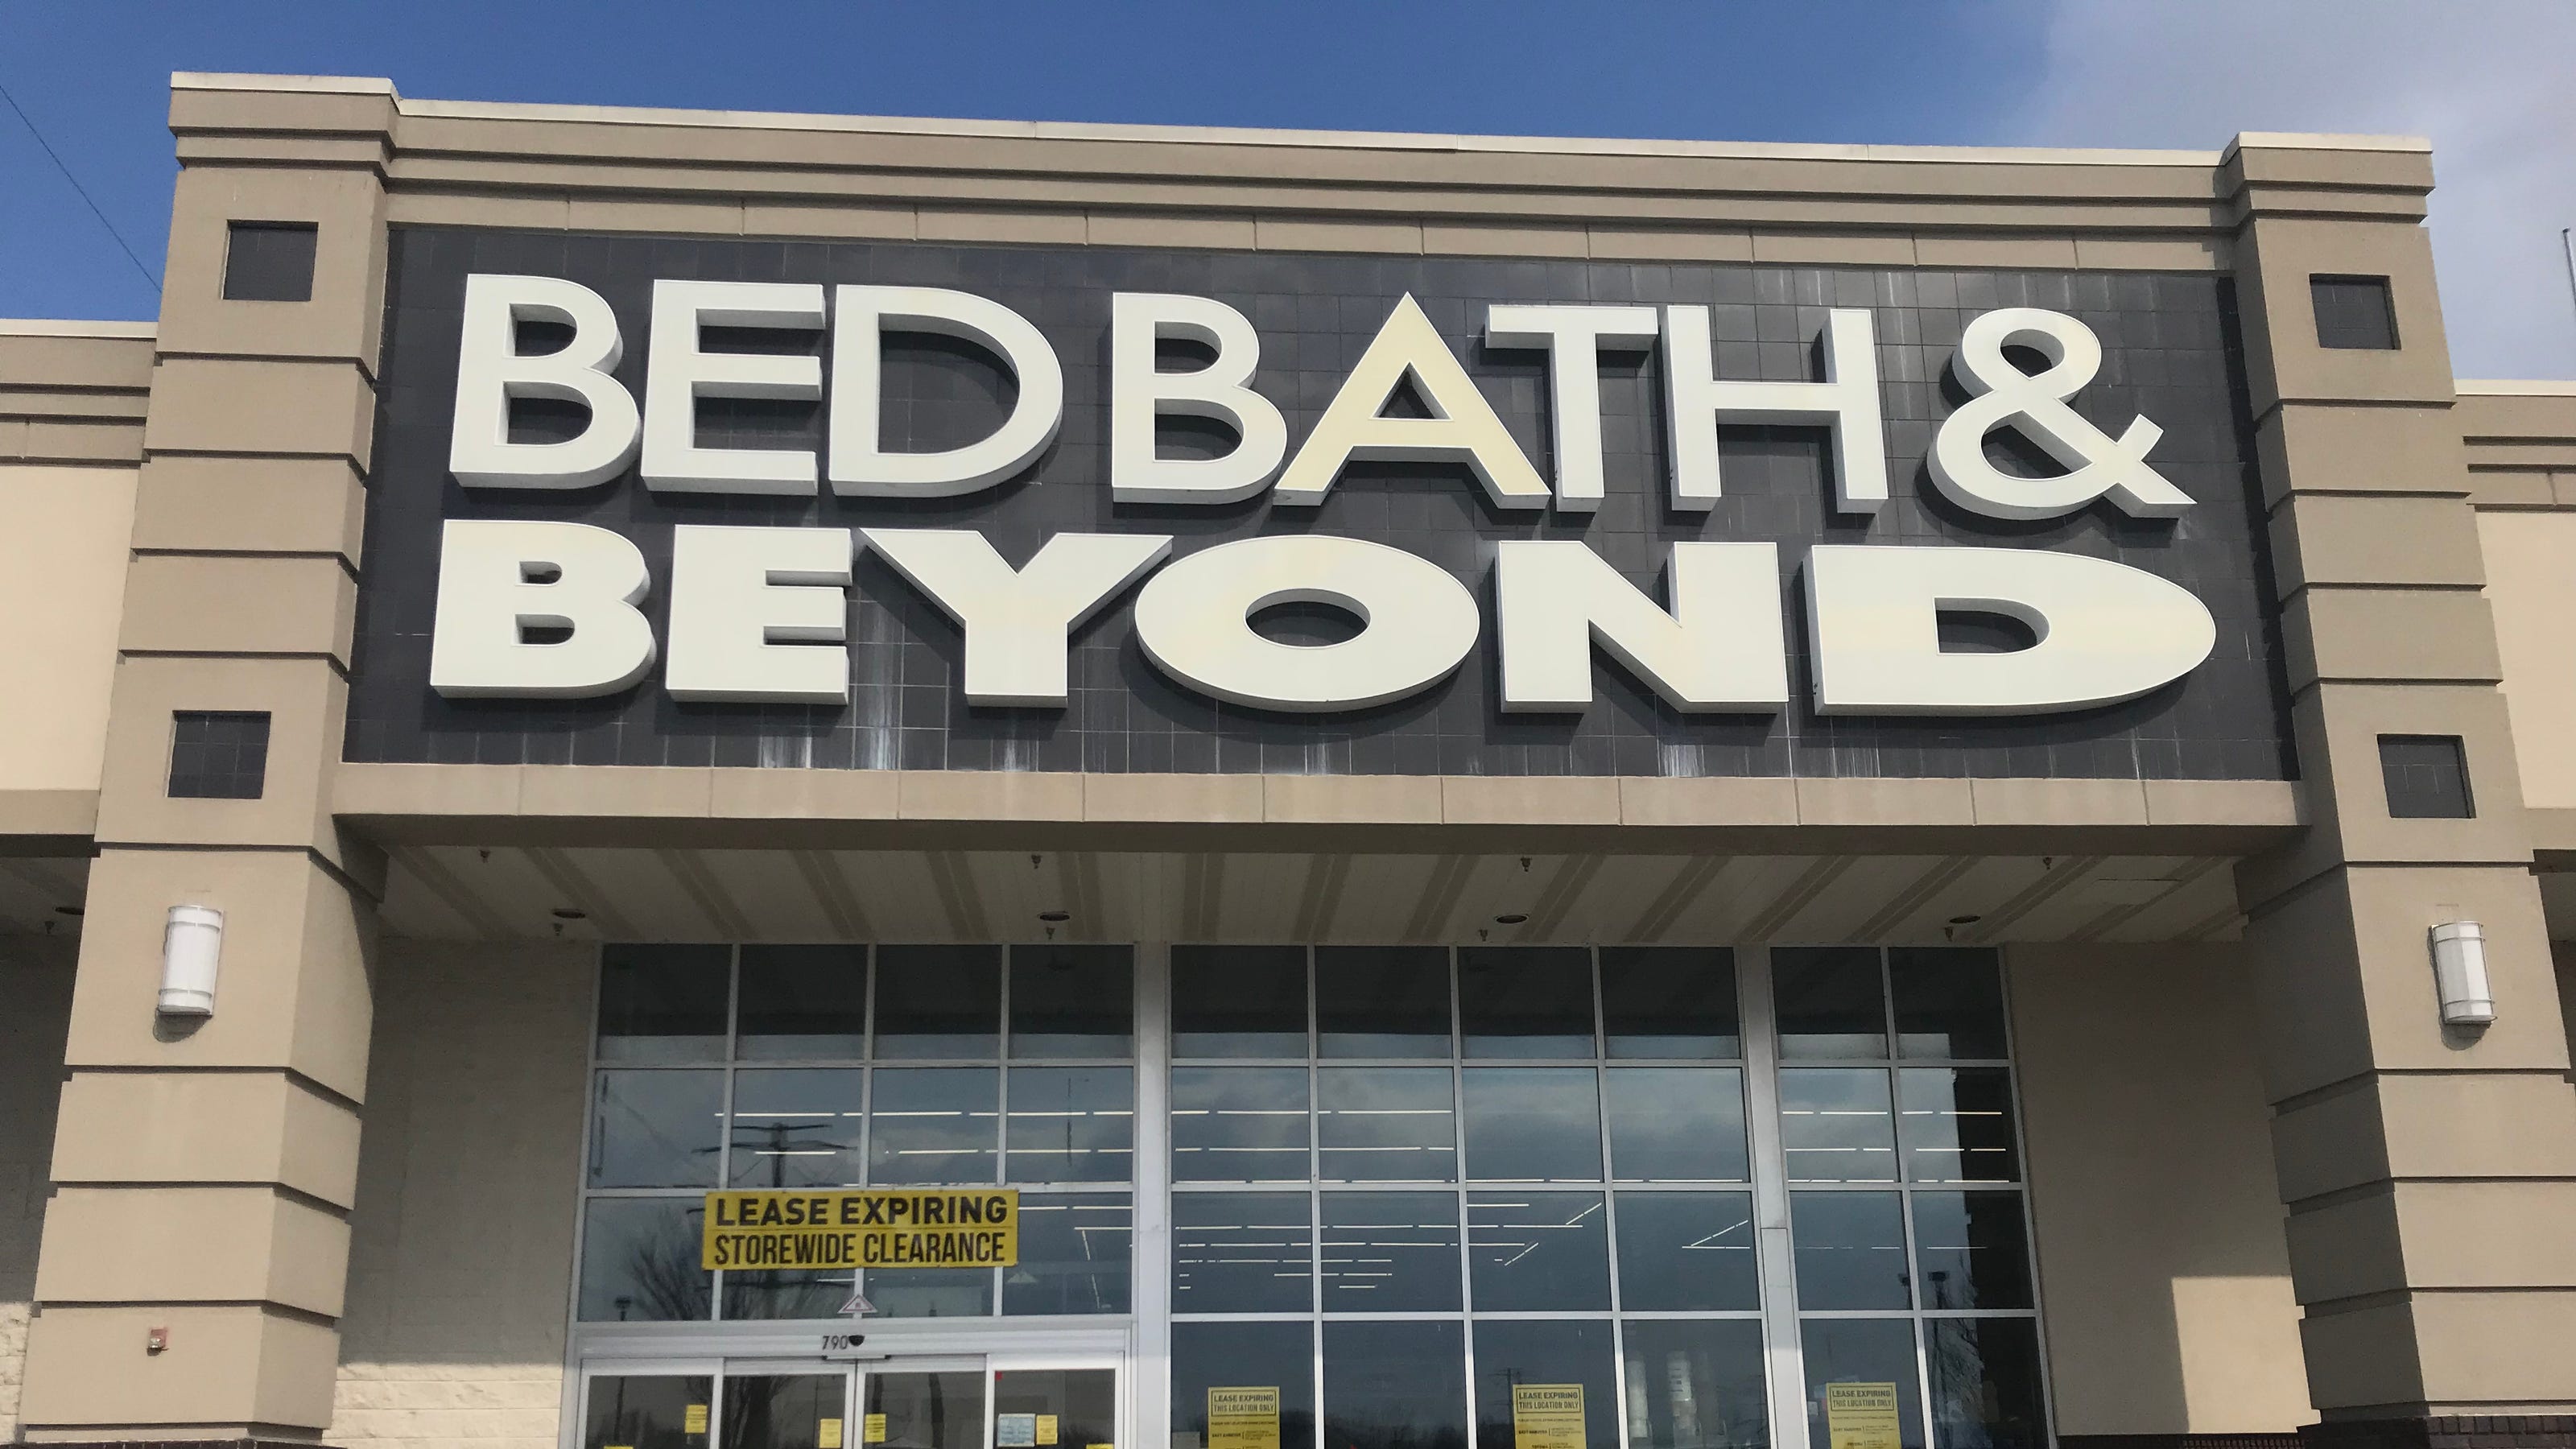 Expired coupons from Bed Bath & Beyond can be used at these stores